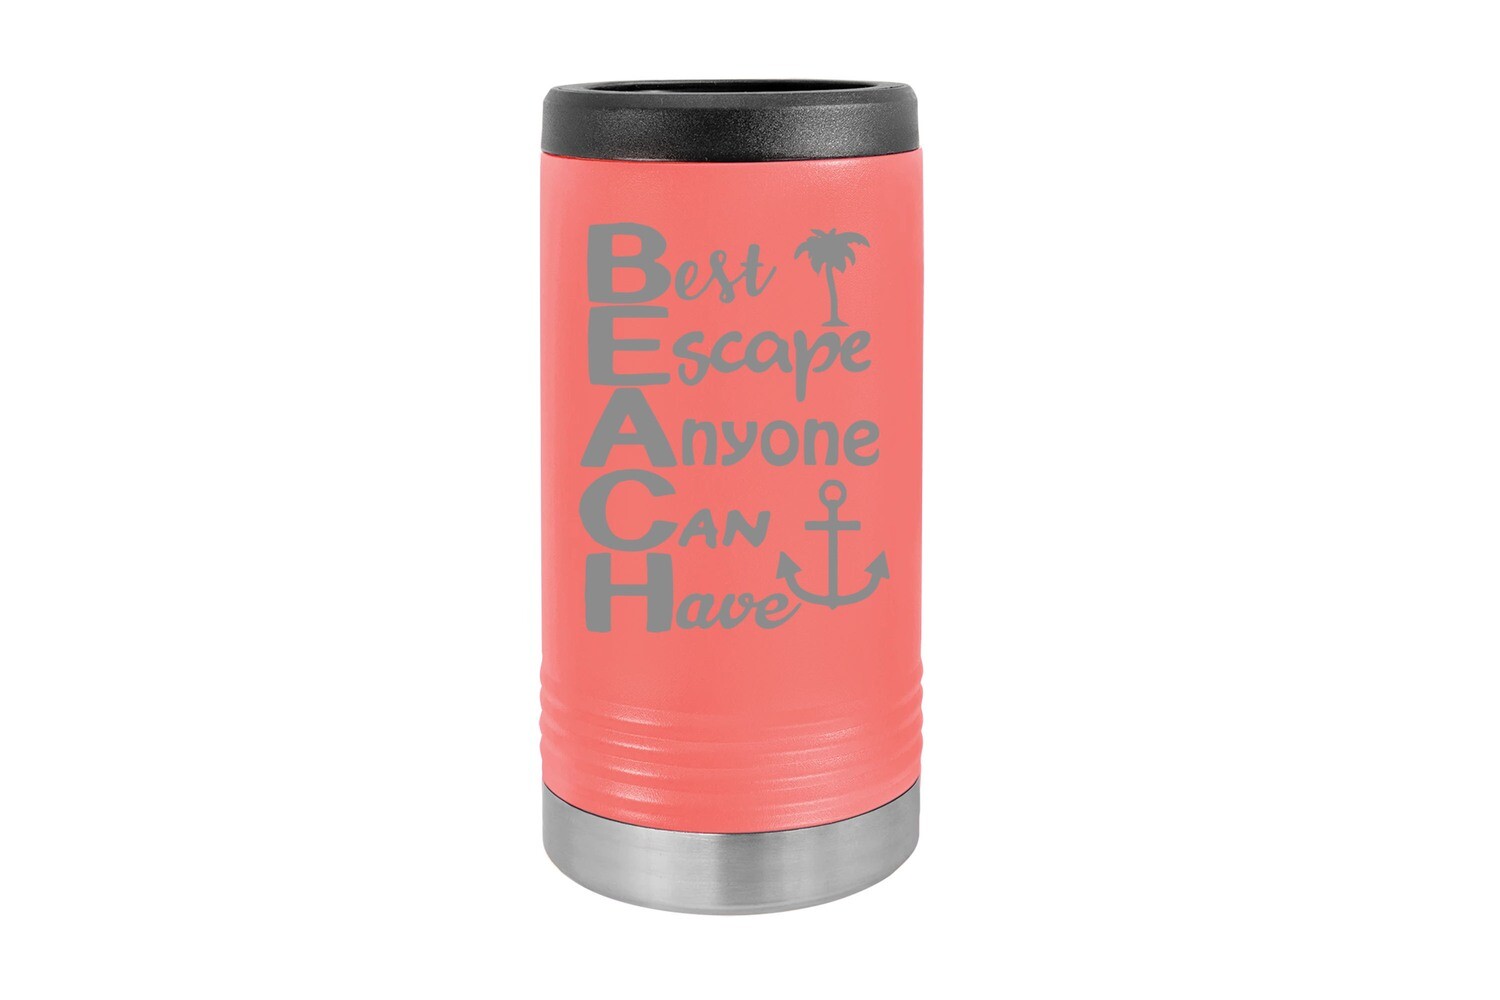 BEACH: Best Escape Anyone Can Have - SLIM Beverage Holder